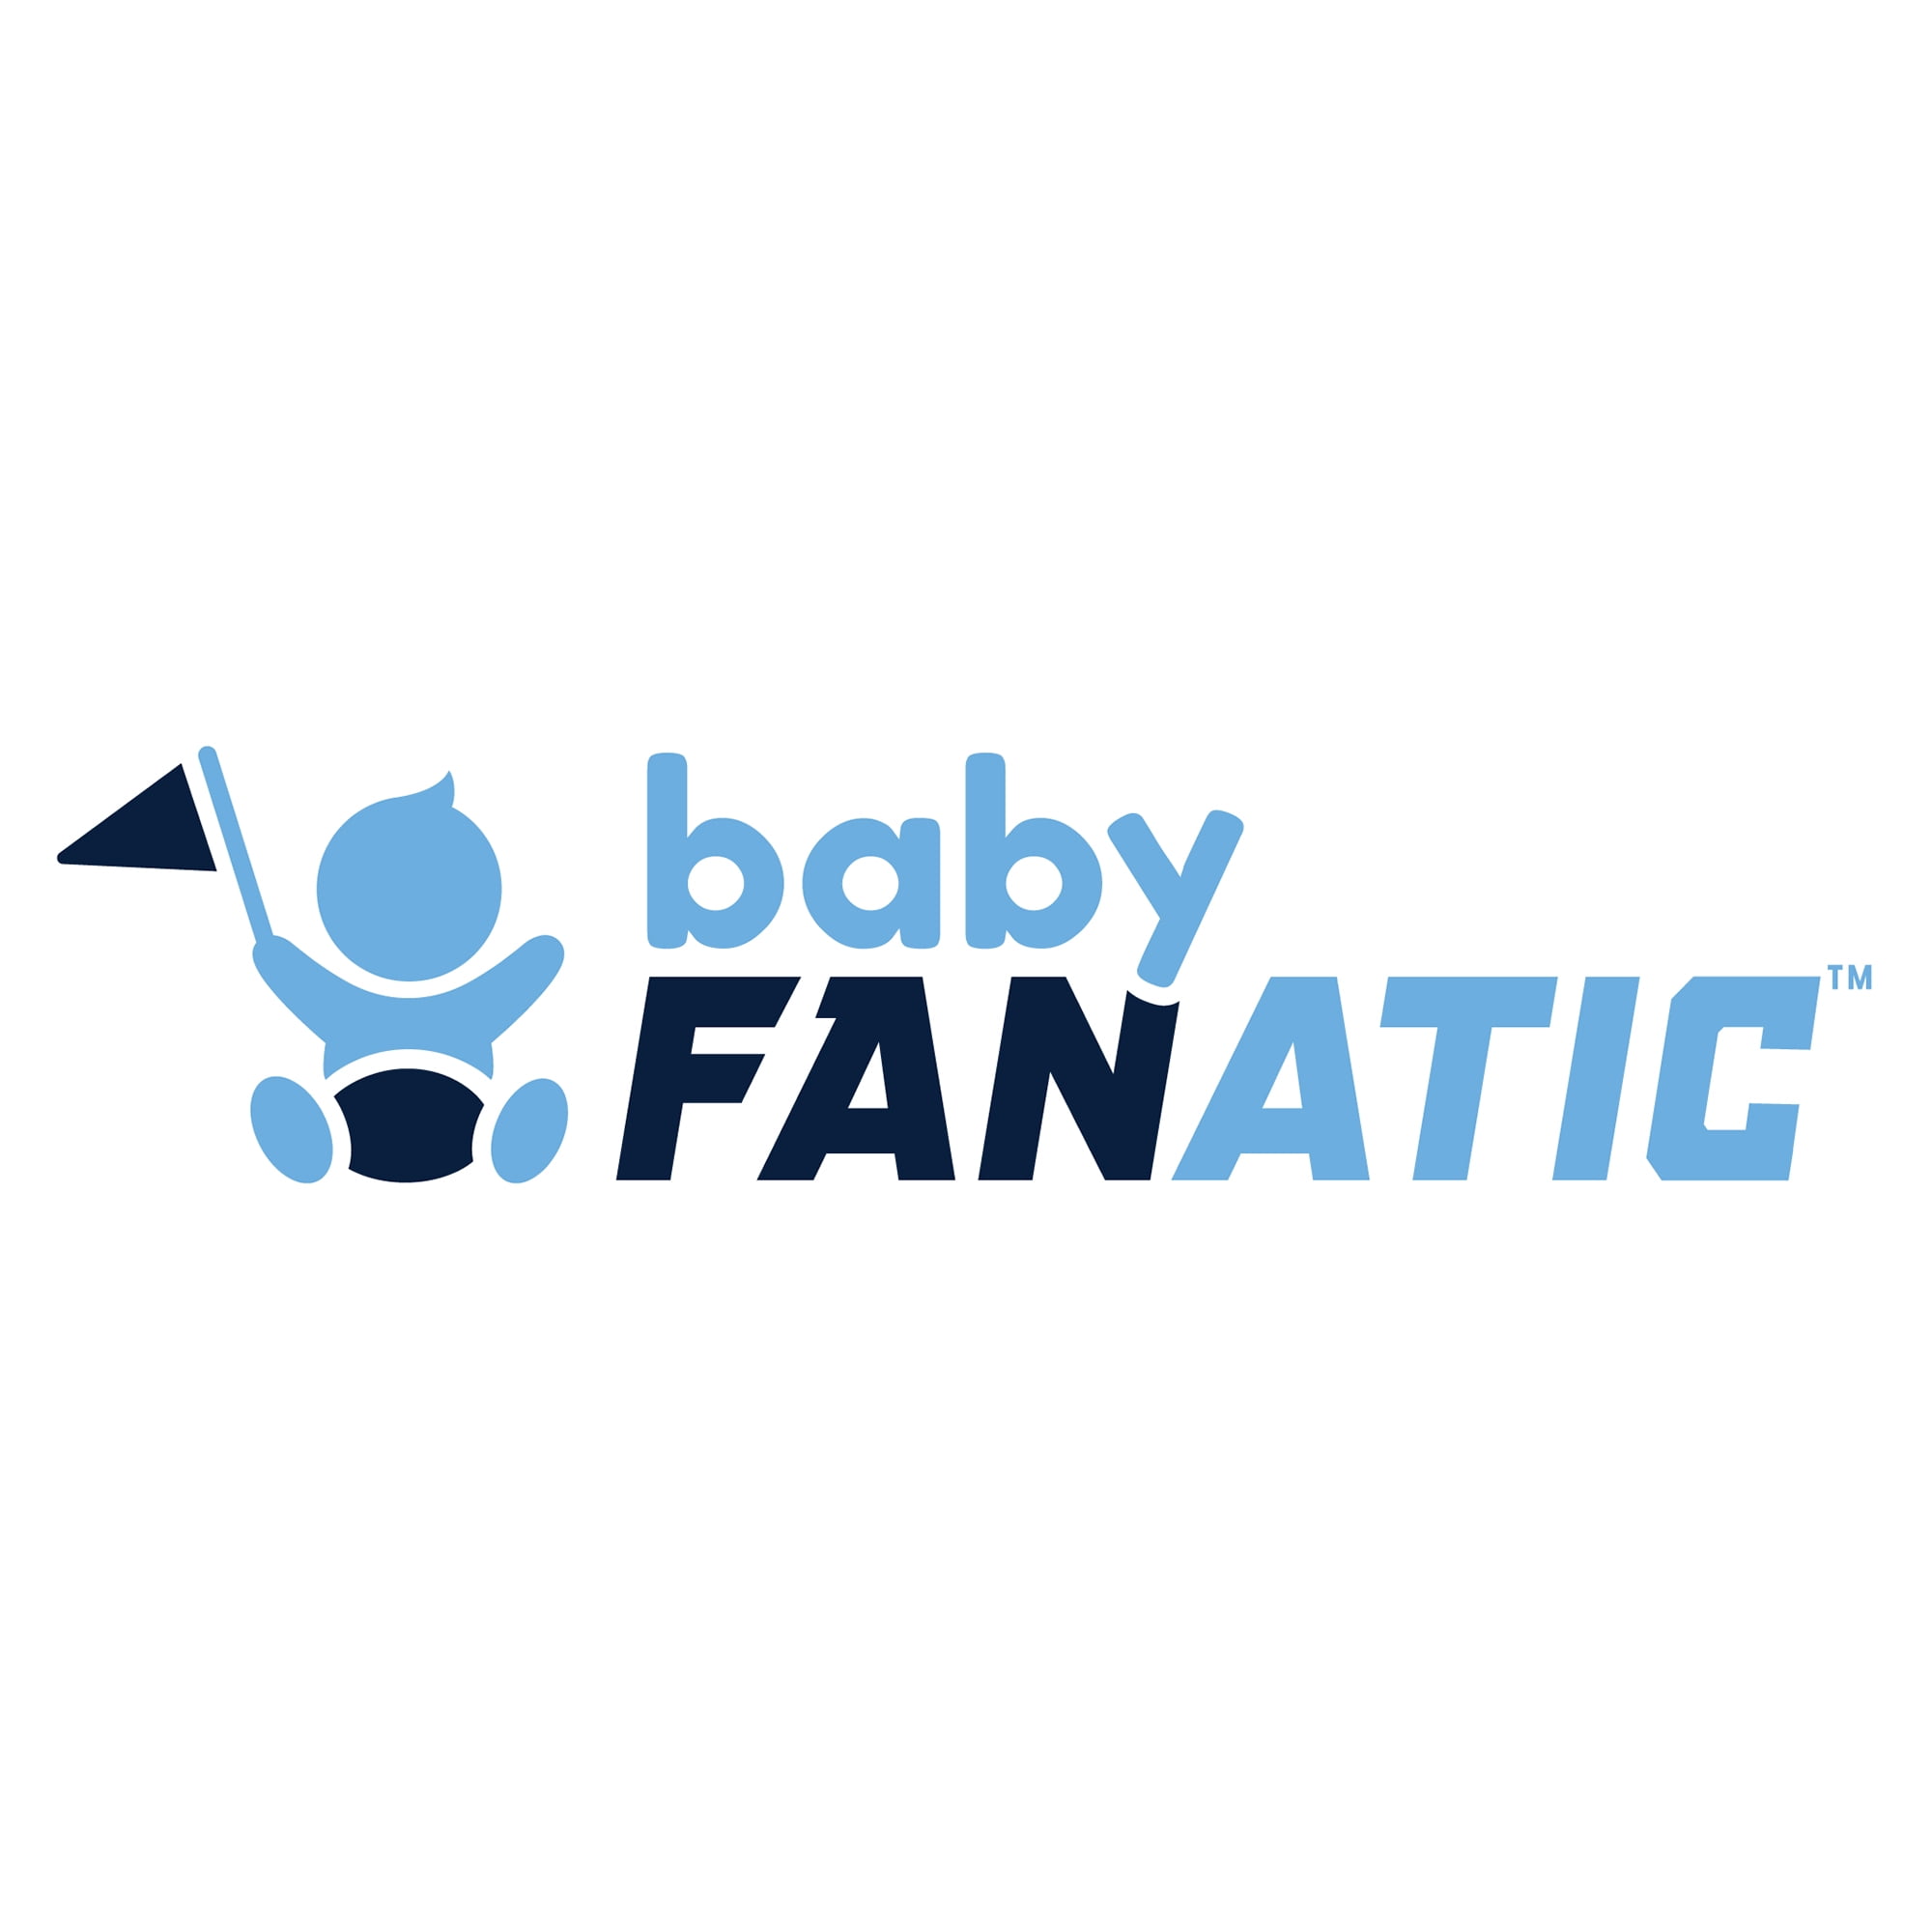 Baby Fanatic Officially Licensed Unisex Baby Bibs 2 Pack - NHL